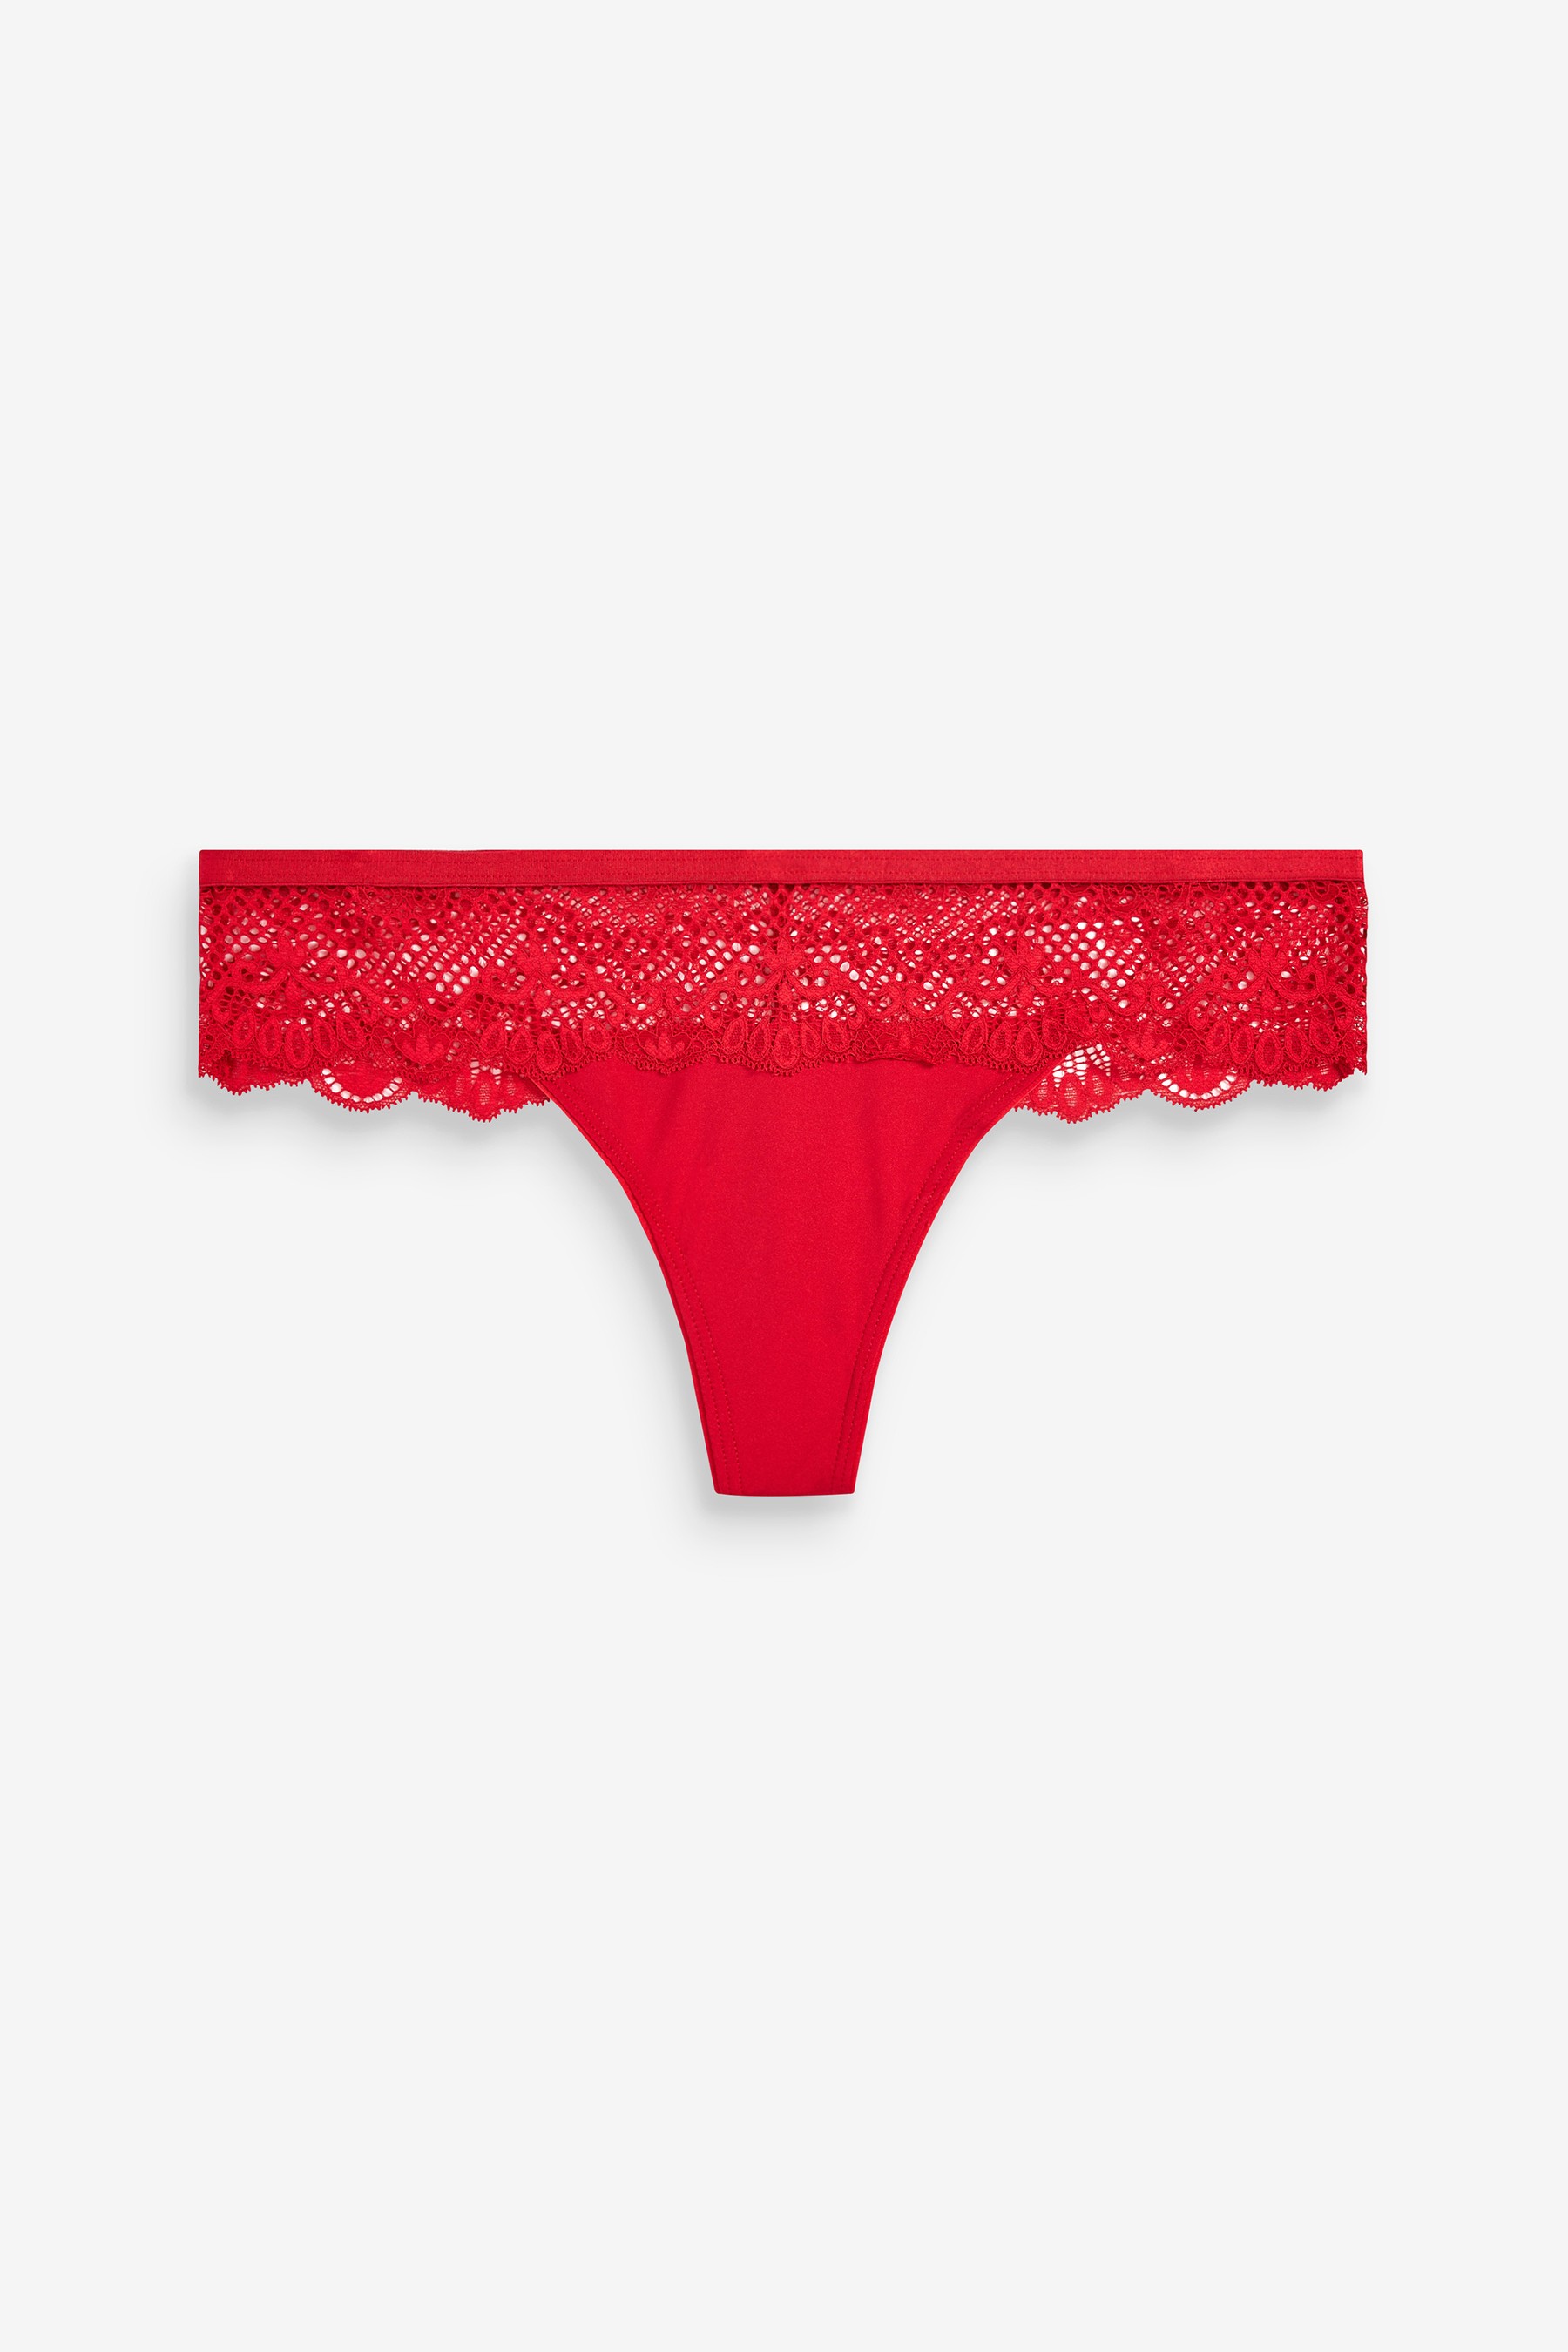 Microfibre And Lace Knickers Thong